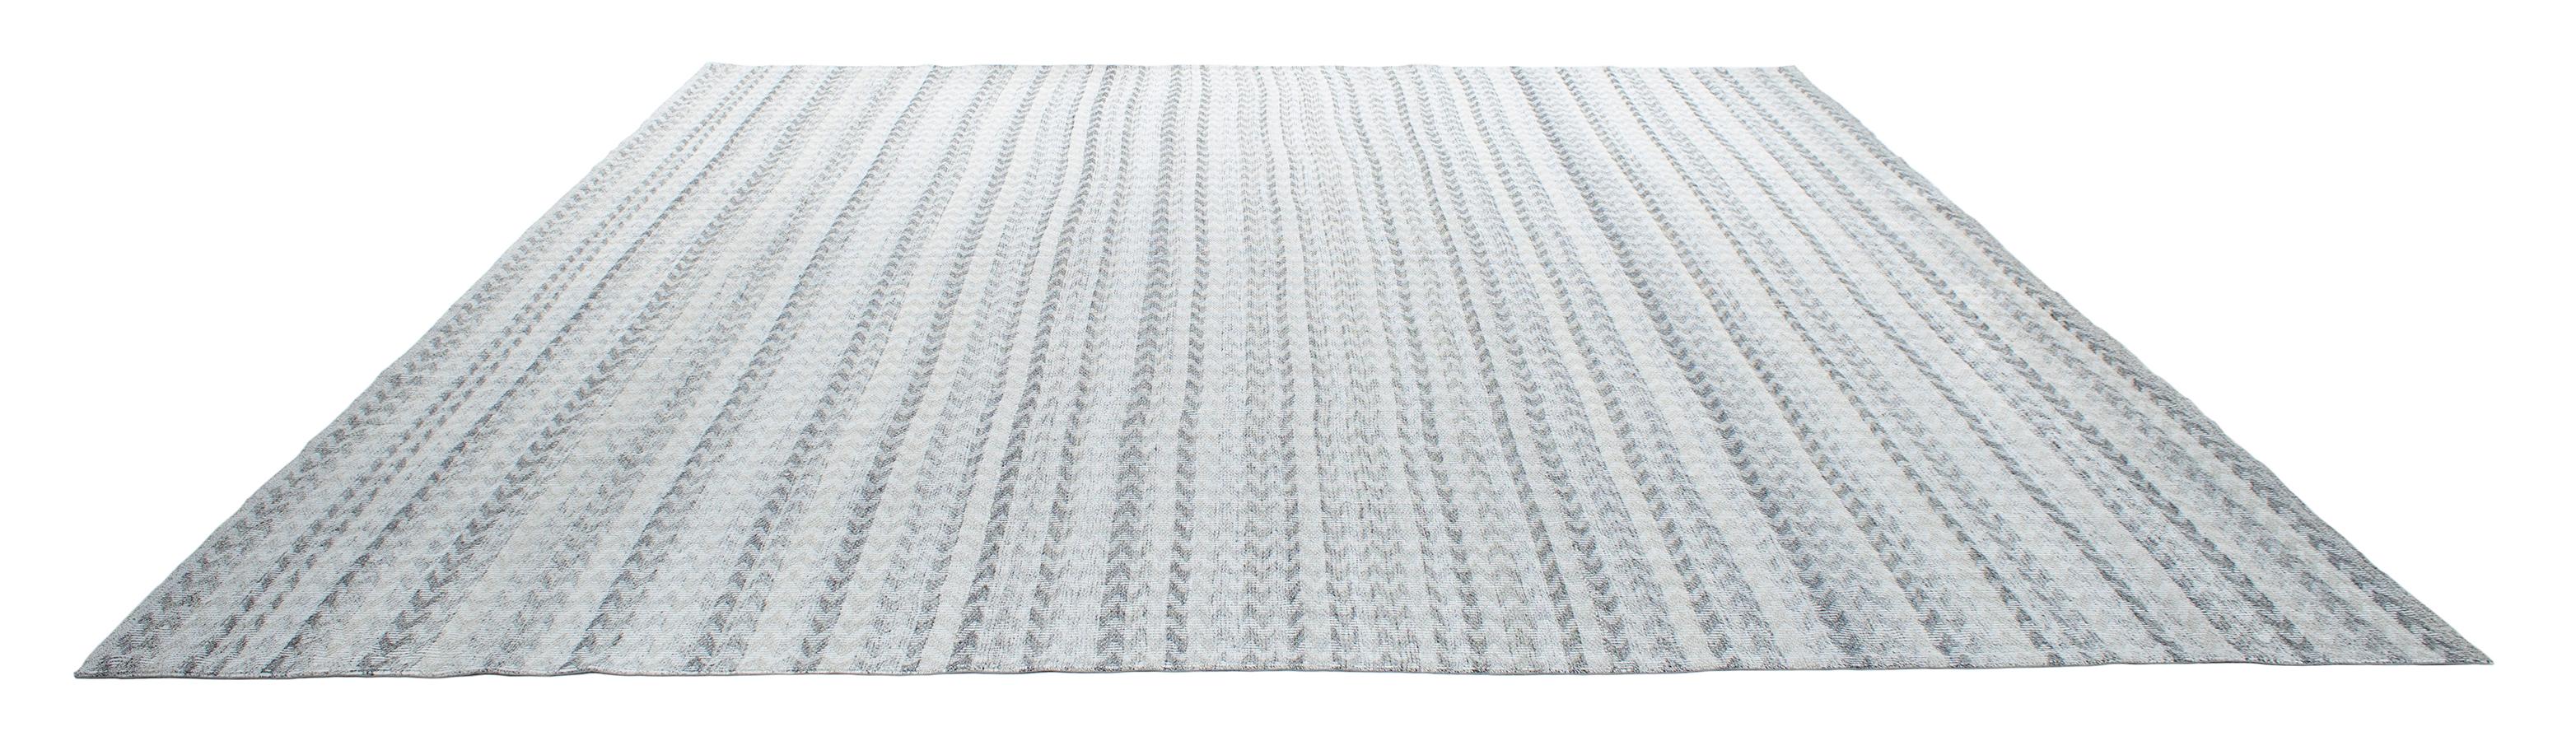 Mid-Century Modern Modern Handwoven Flat-Weave Textured Rug in Grey and Ivory Color For Sale